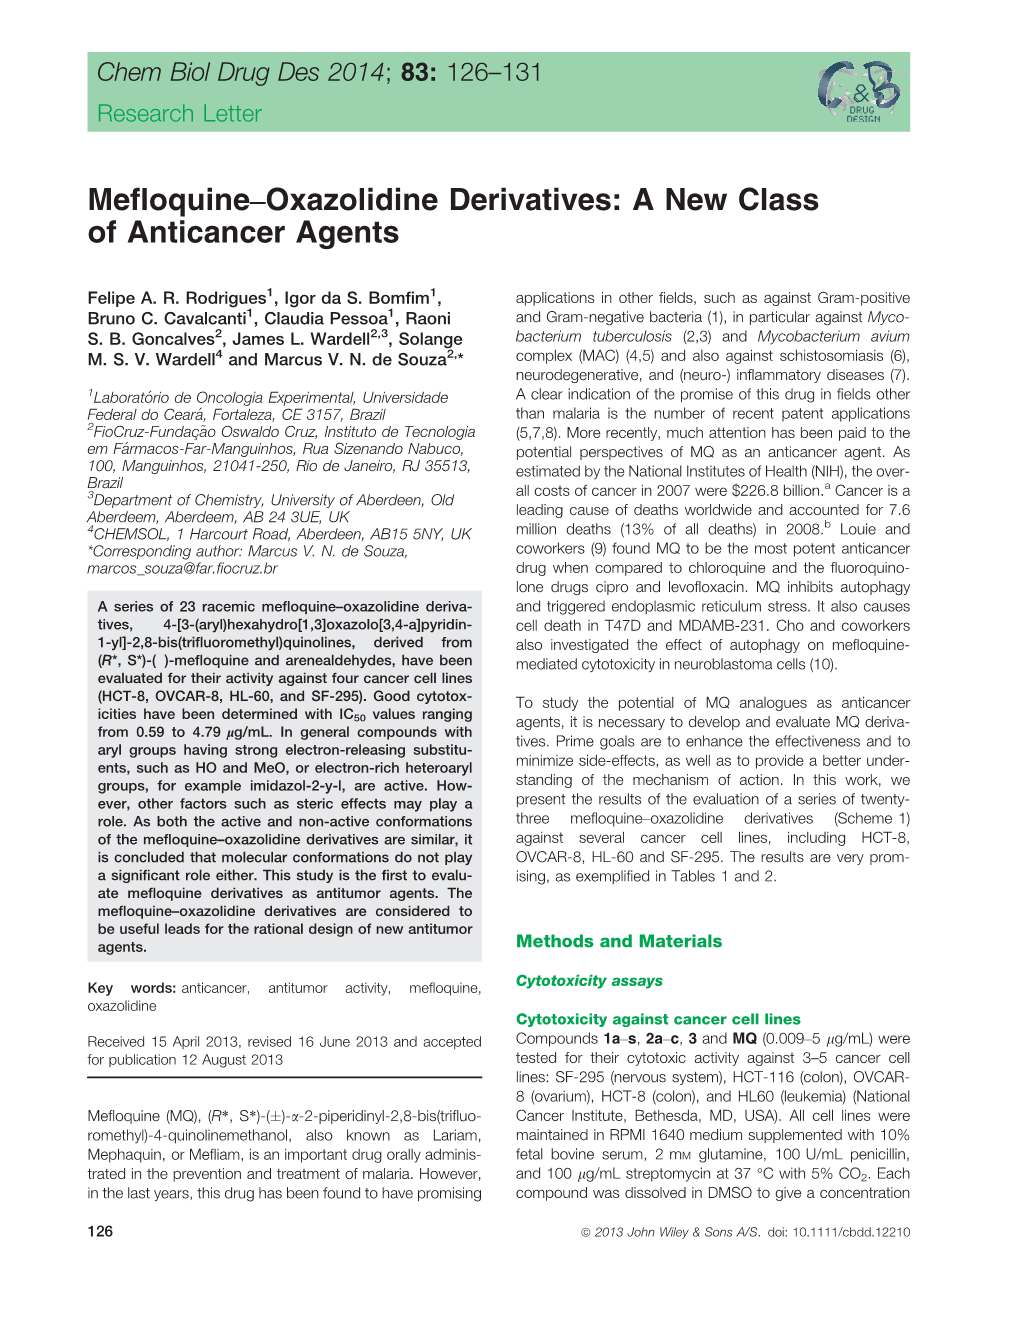 A New Class of Anticancer Agents